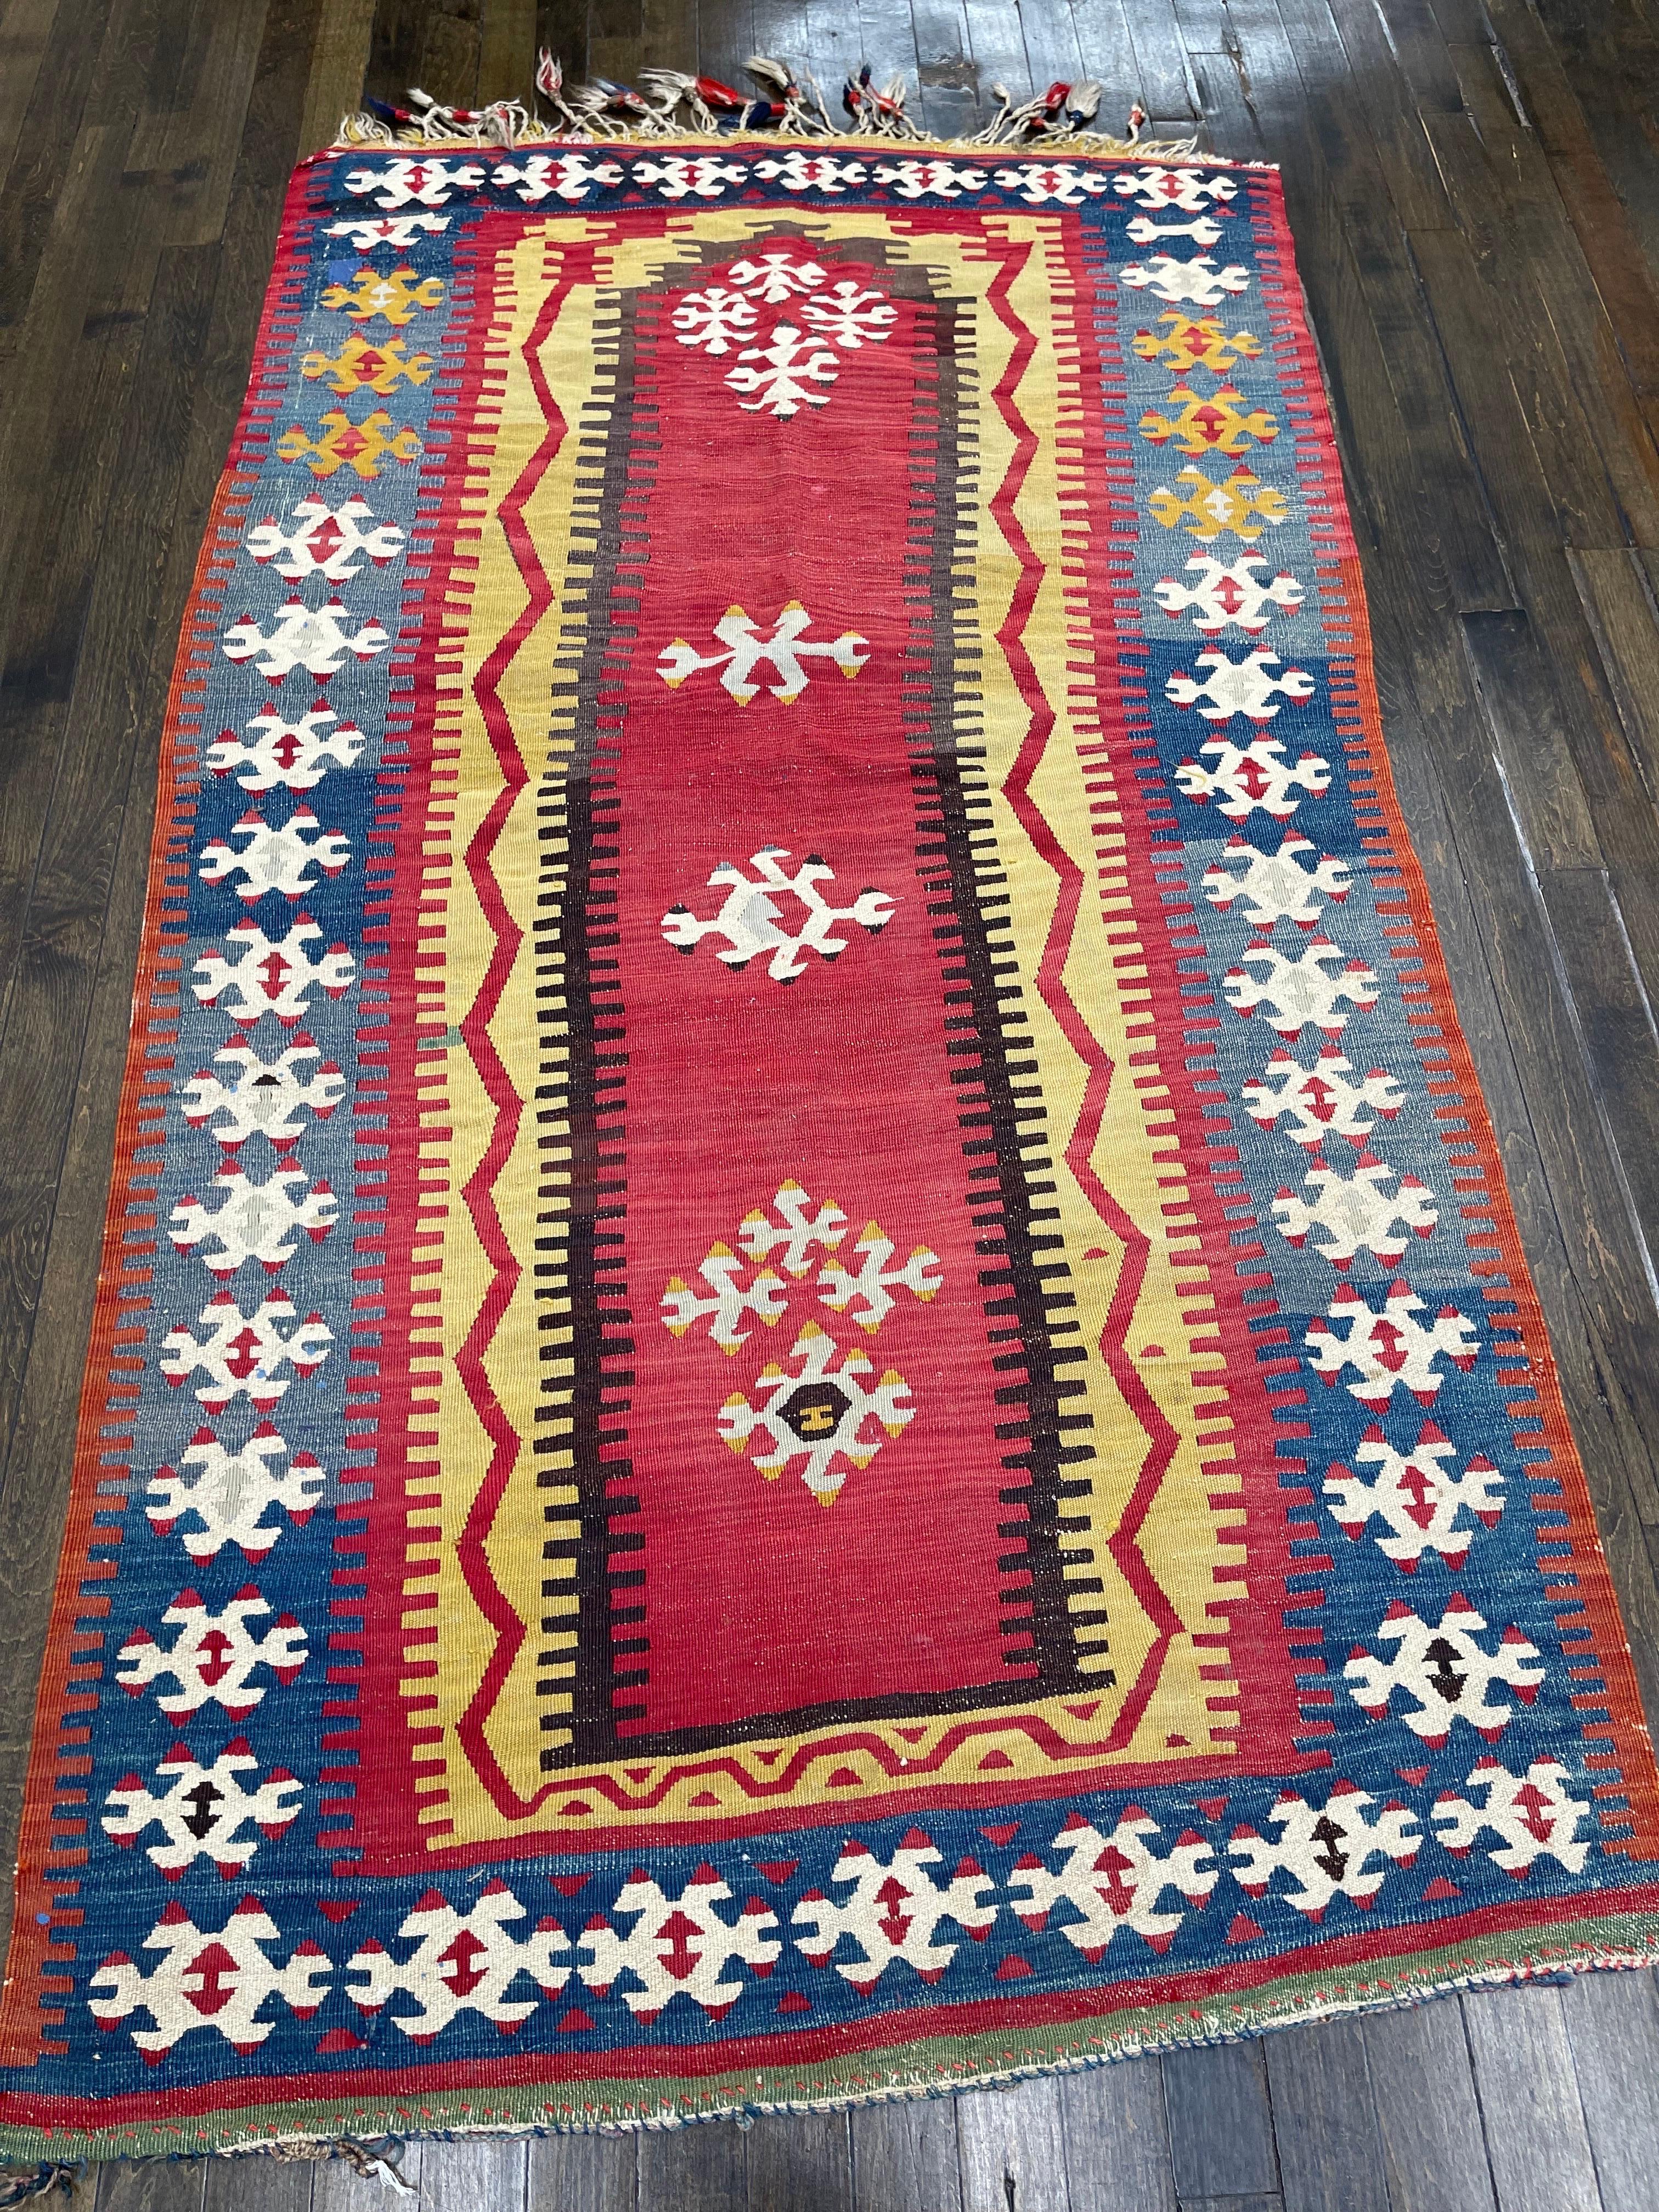 Attributed to Yoruk, this flat weave kilim features a tomato red panel in the middle decorated with scattered ivory rossetts framed with a very bright yellow with abstract red lines moving around it.The whole kilim is then surrounded with a